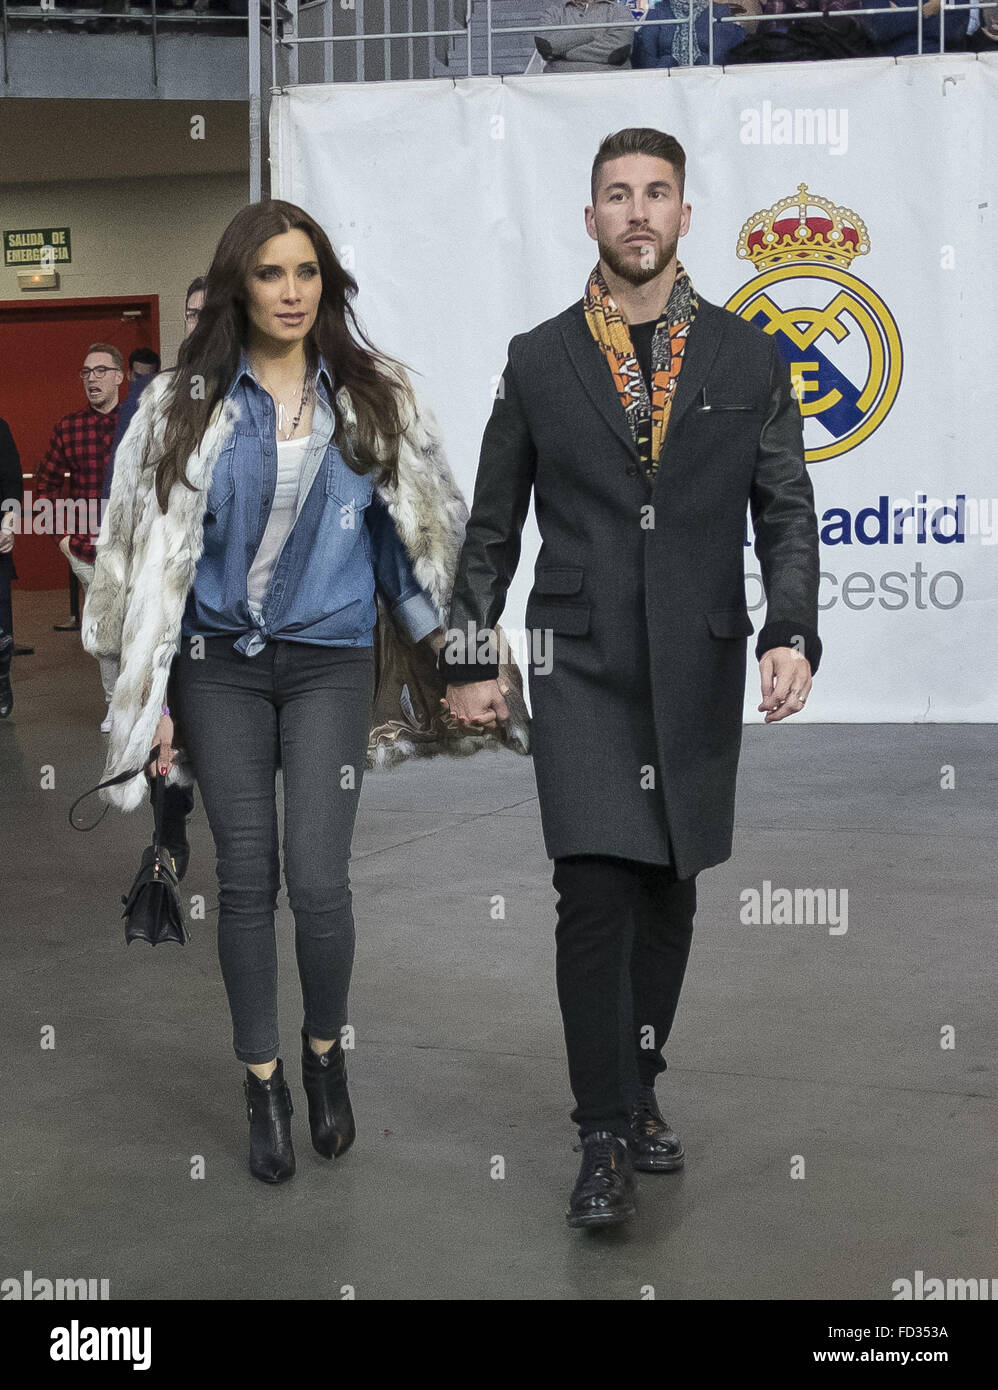 Sergio Ramos and his wife Pilar Rubio watch the Party ACB Basketball League  game between Real Madrid and Barcelona at the Barclaycard Center Featuring:  Sergio Ramos, Pilar Rubio Where: Madrid, Spain When: